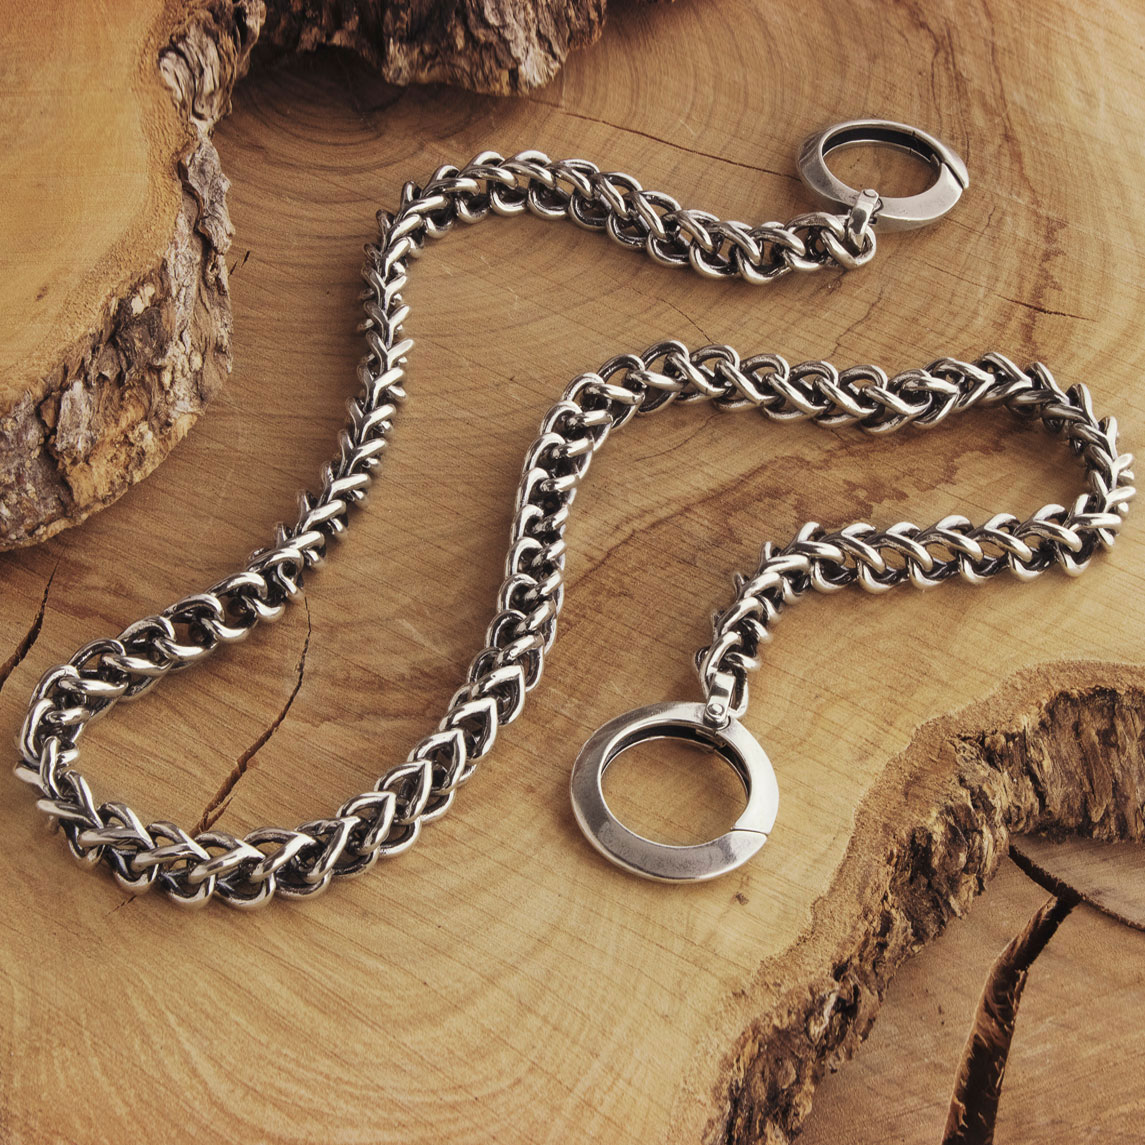 Silvertraits Thick Wheat Wallet Chain Made of Sterling Silver